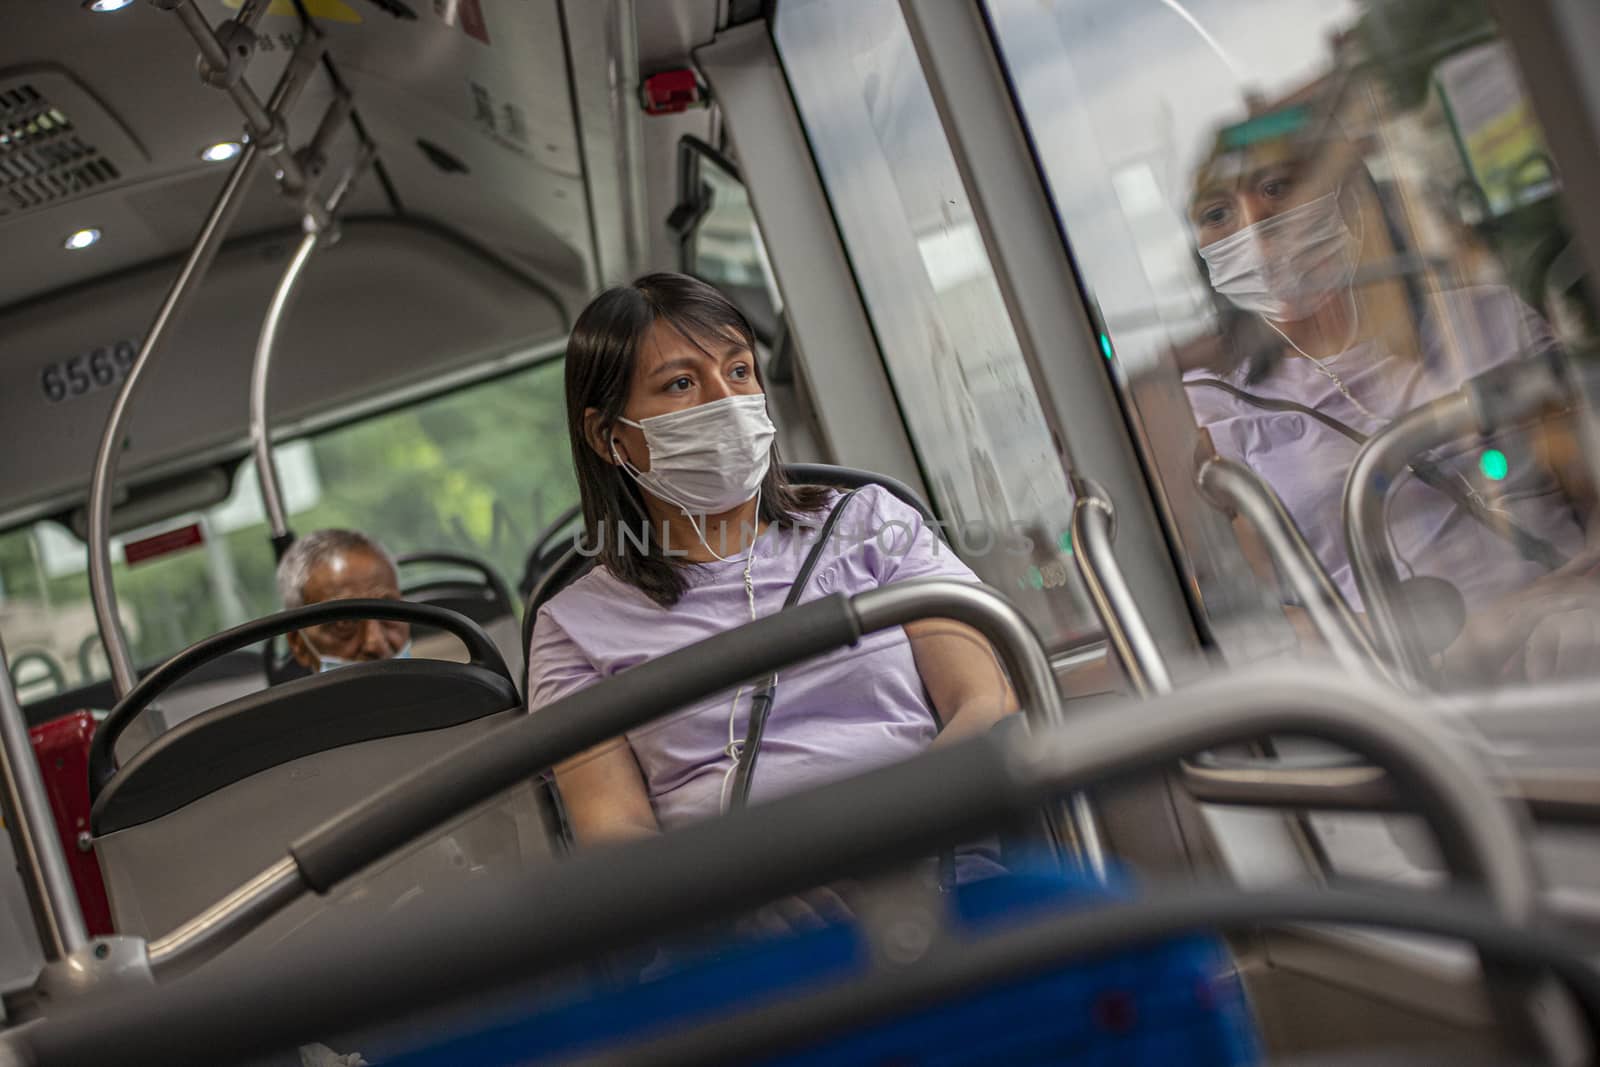 BOLOGNA, ITALY 17 JUNE 2020: Girl in the bus with medical mask during Covid quarantine